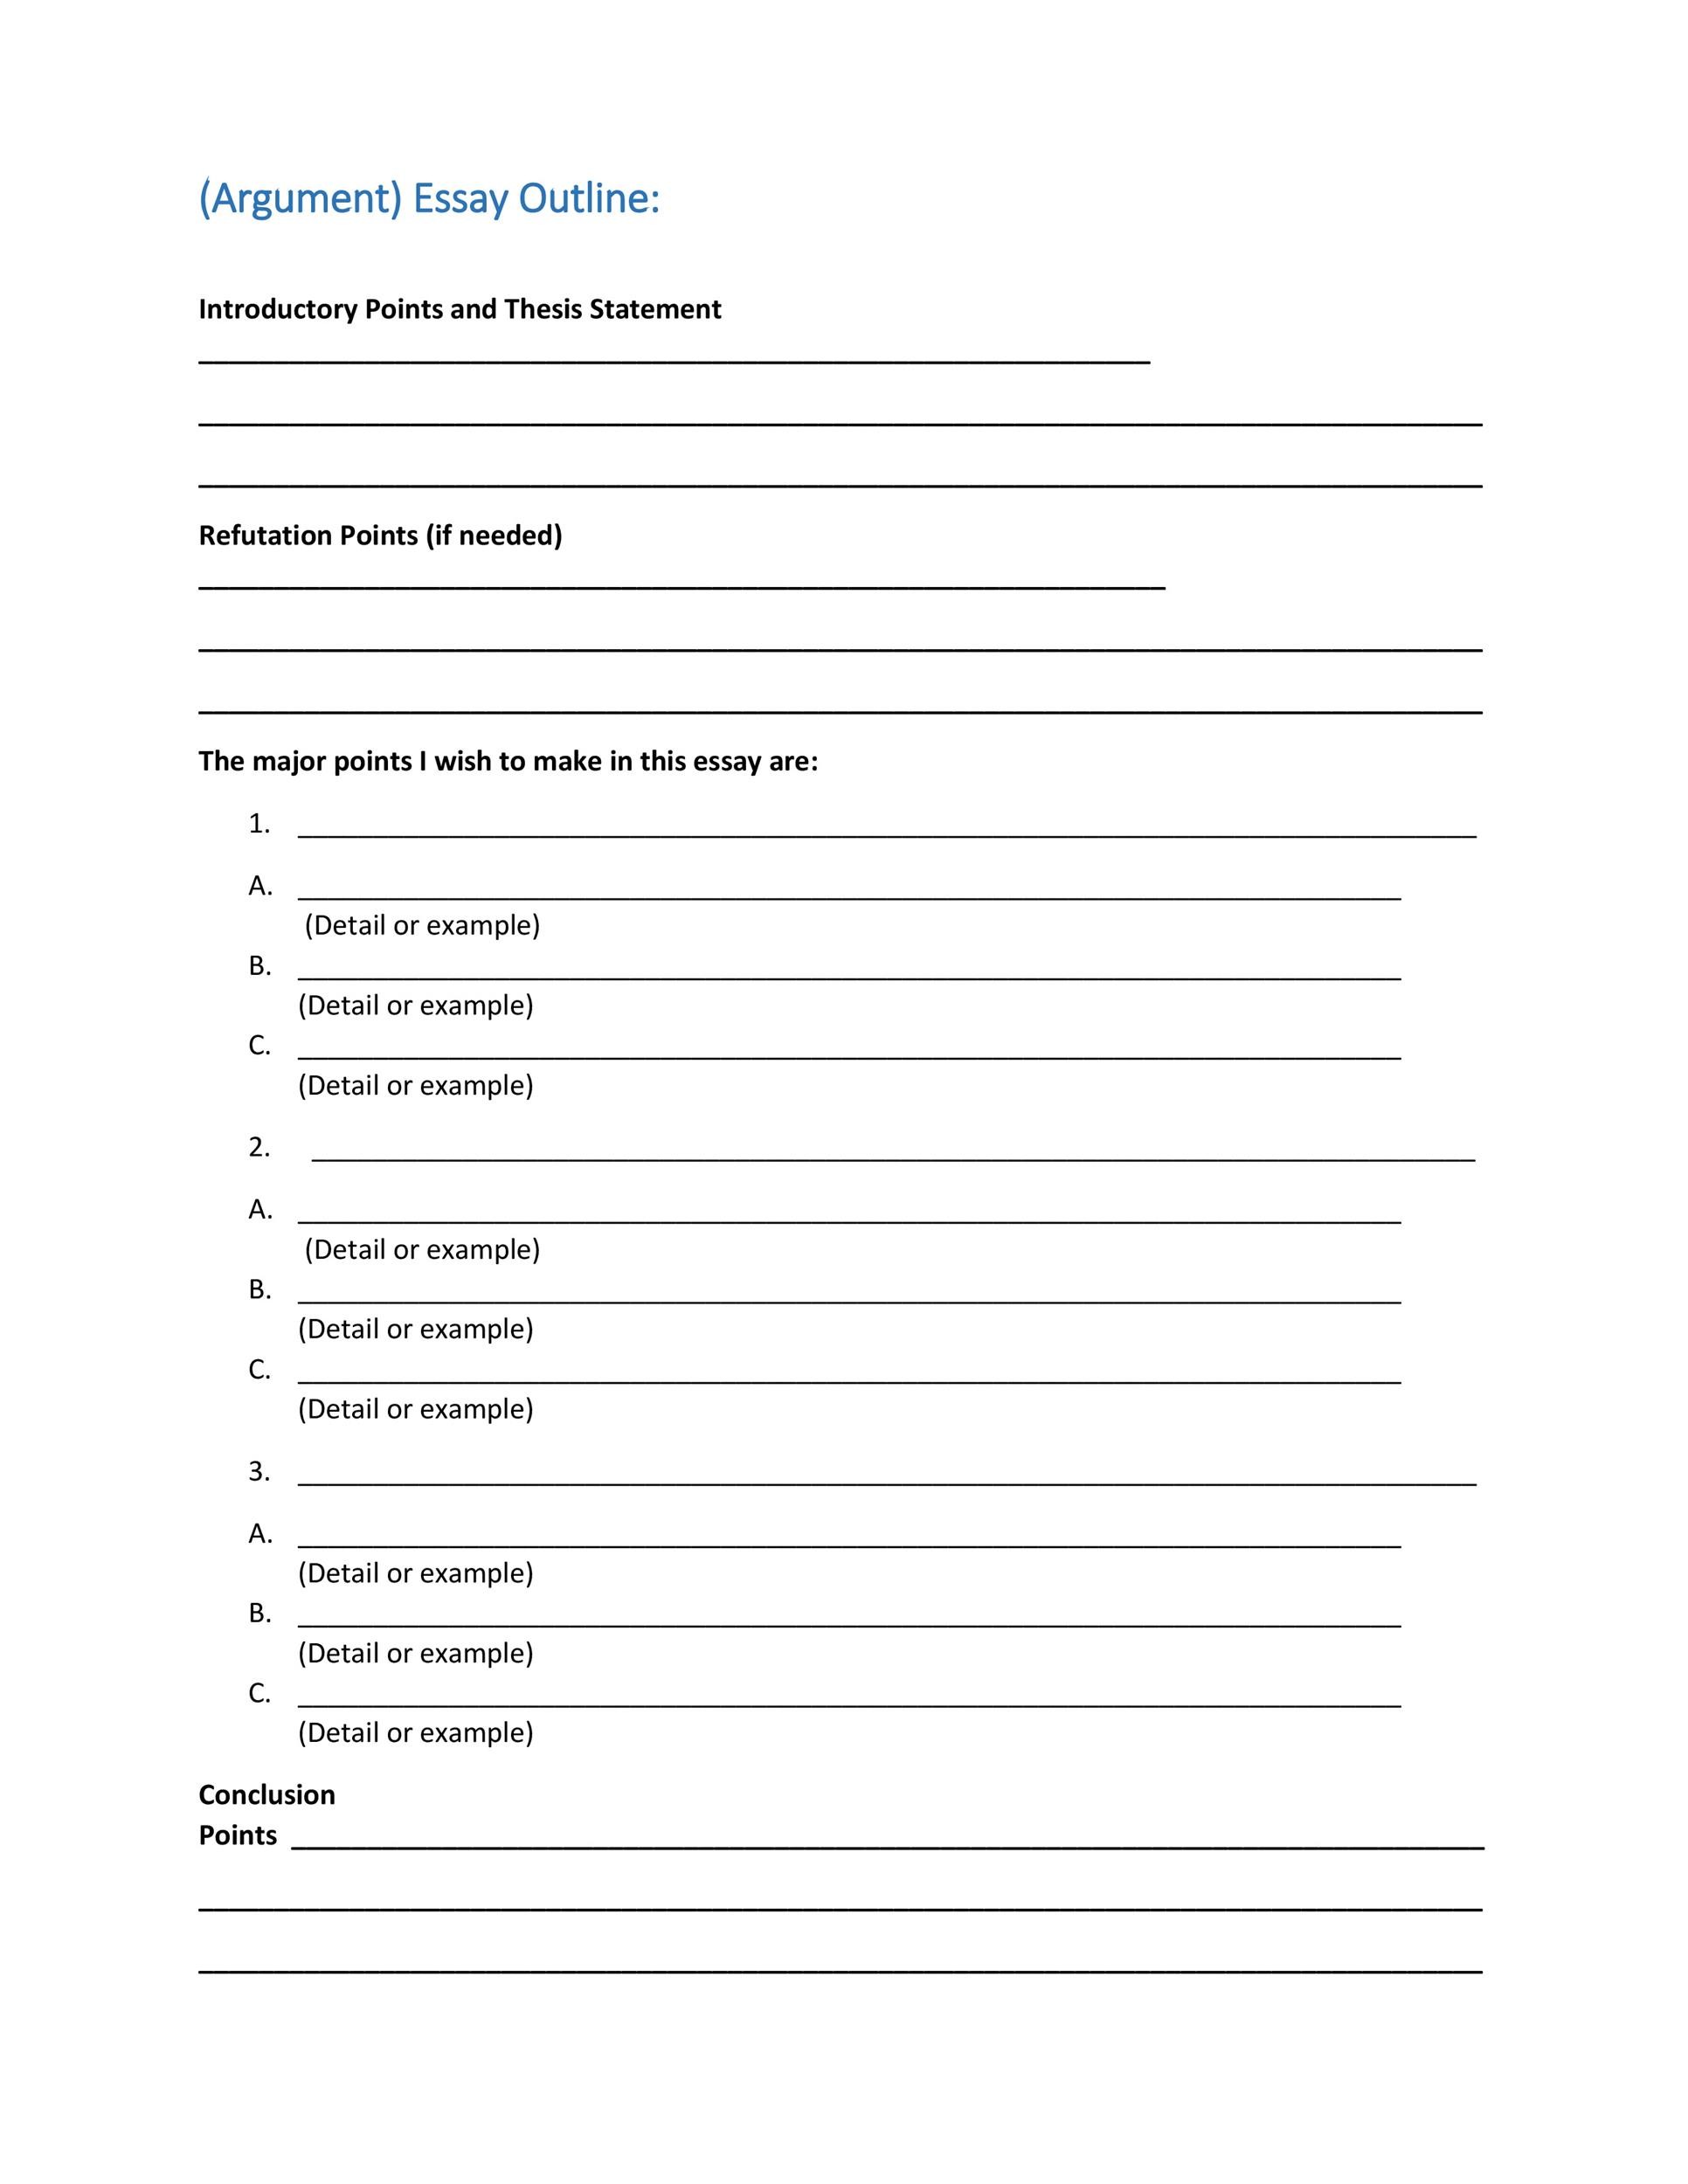 outline of essay template